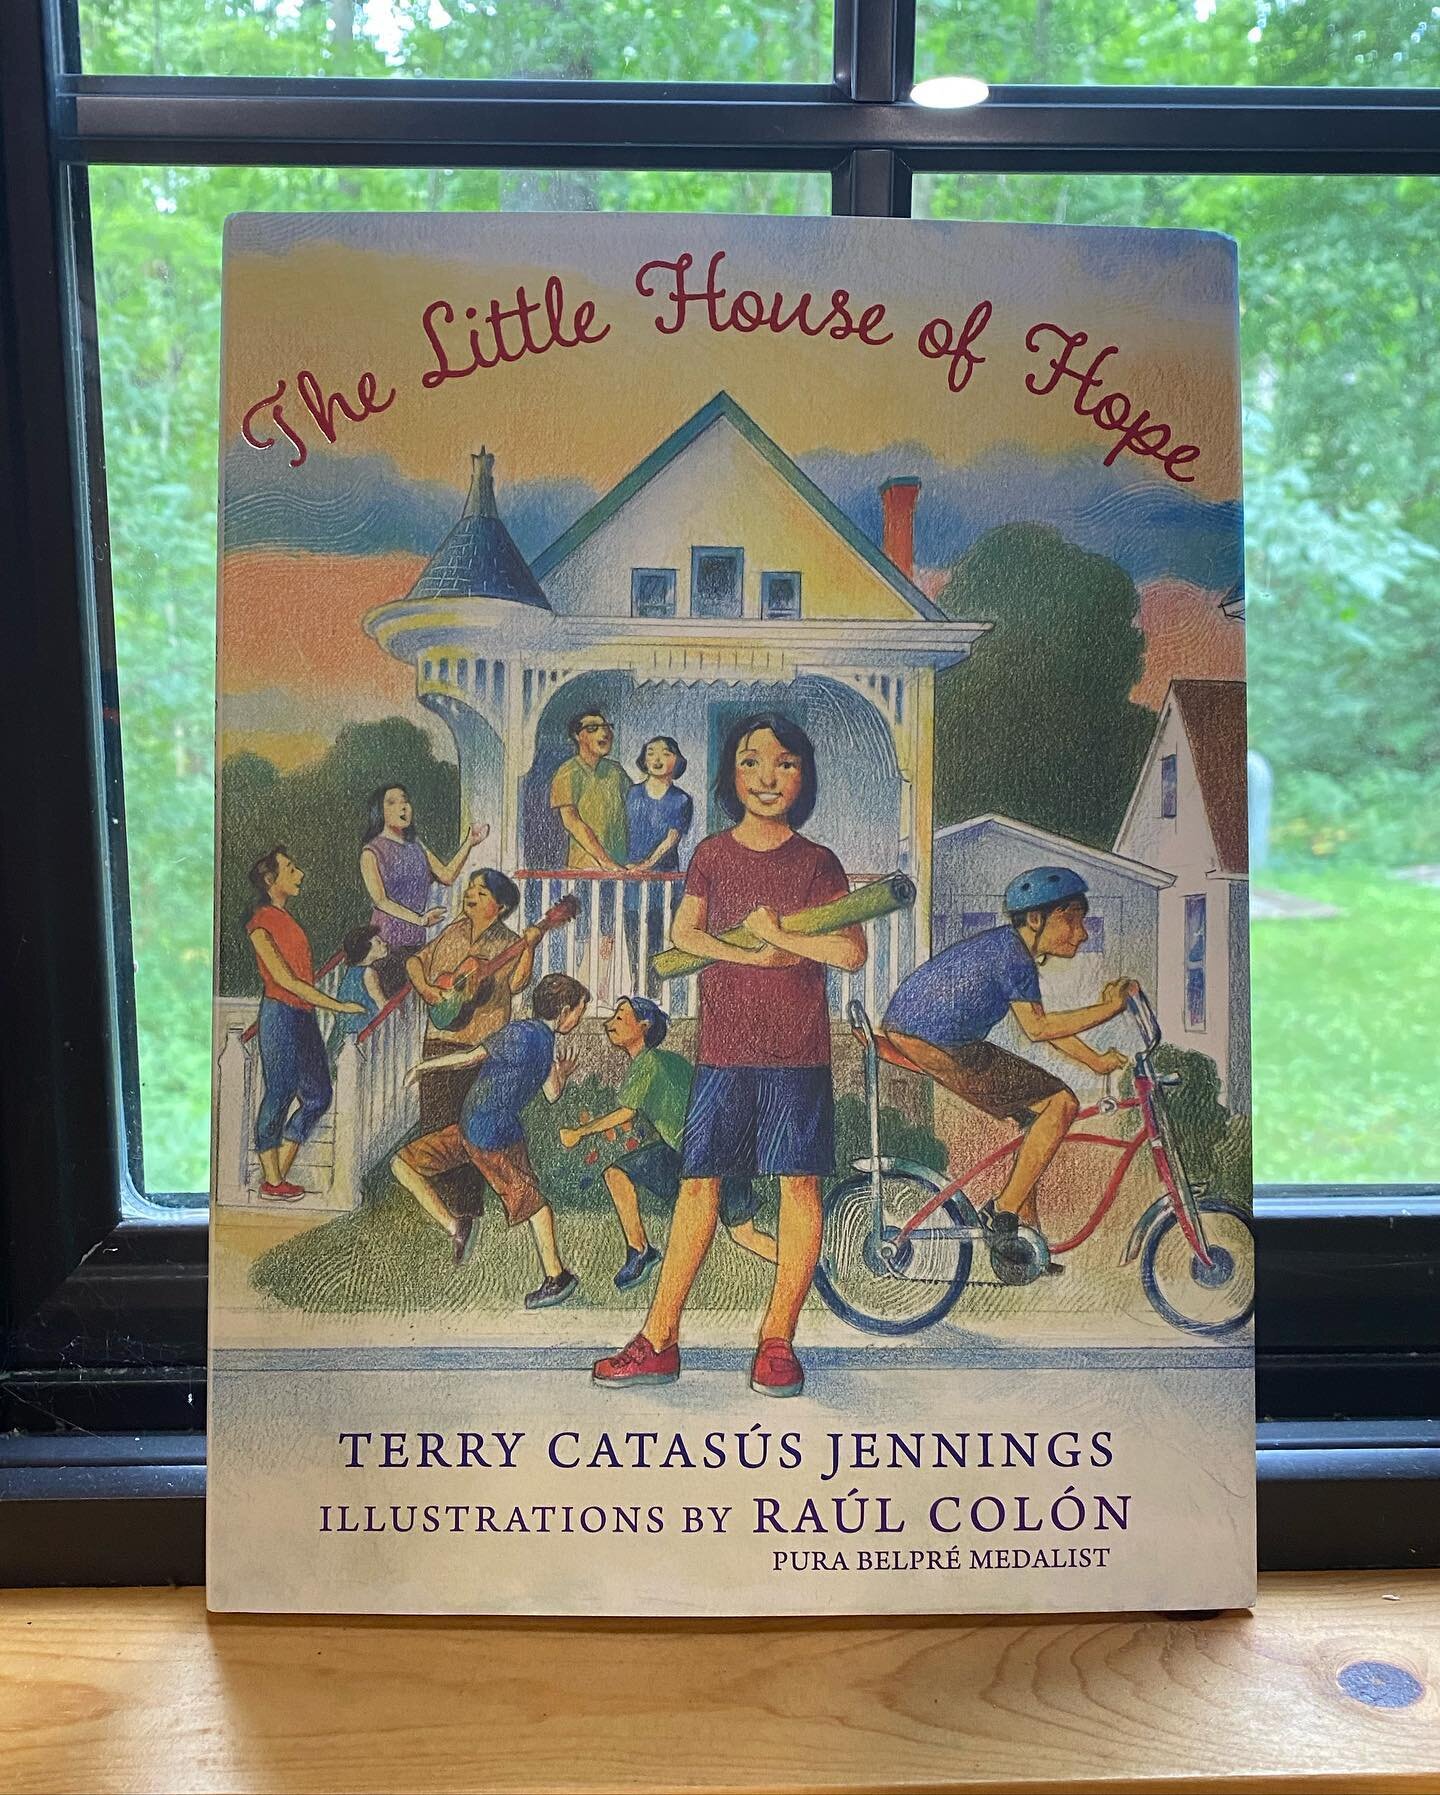 THE LITTLE HOUSE OF HOPE written by Terry Catas&uacute;s Jennings and illustrated by Ra&uacute;l Col&oacute;n is a heart-warming book about a family with a little house and a lot of love. 

The story starts with Esperanza&rsquo;s family arriving in t